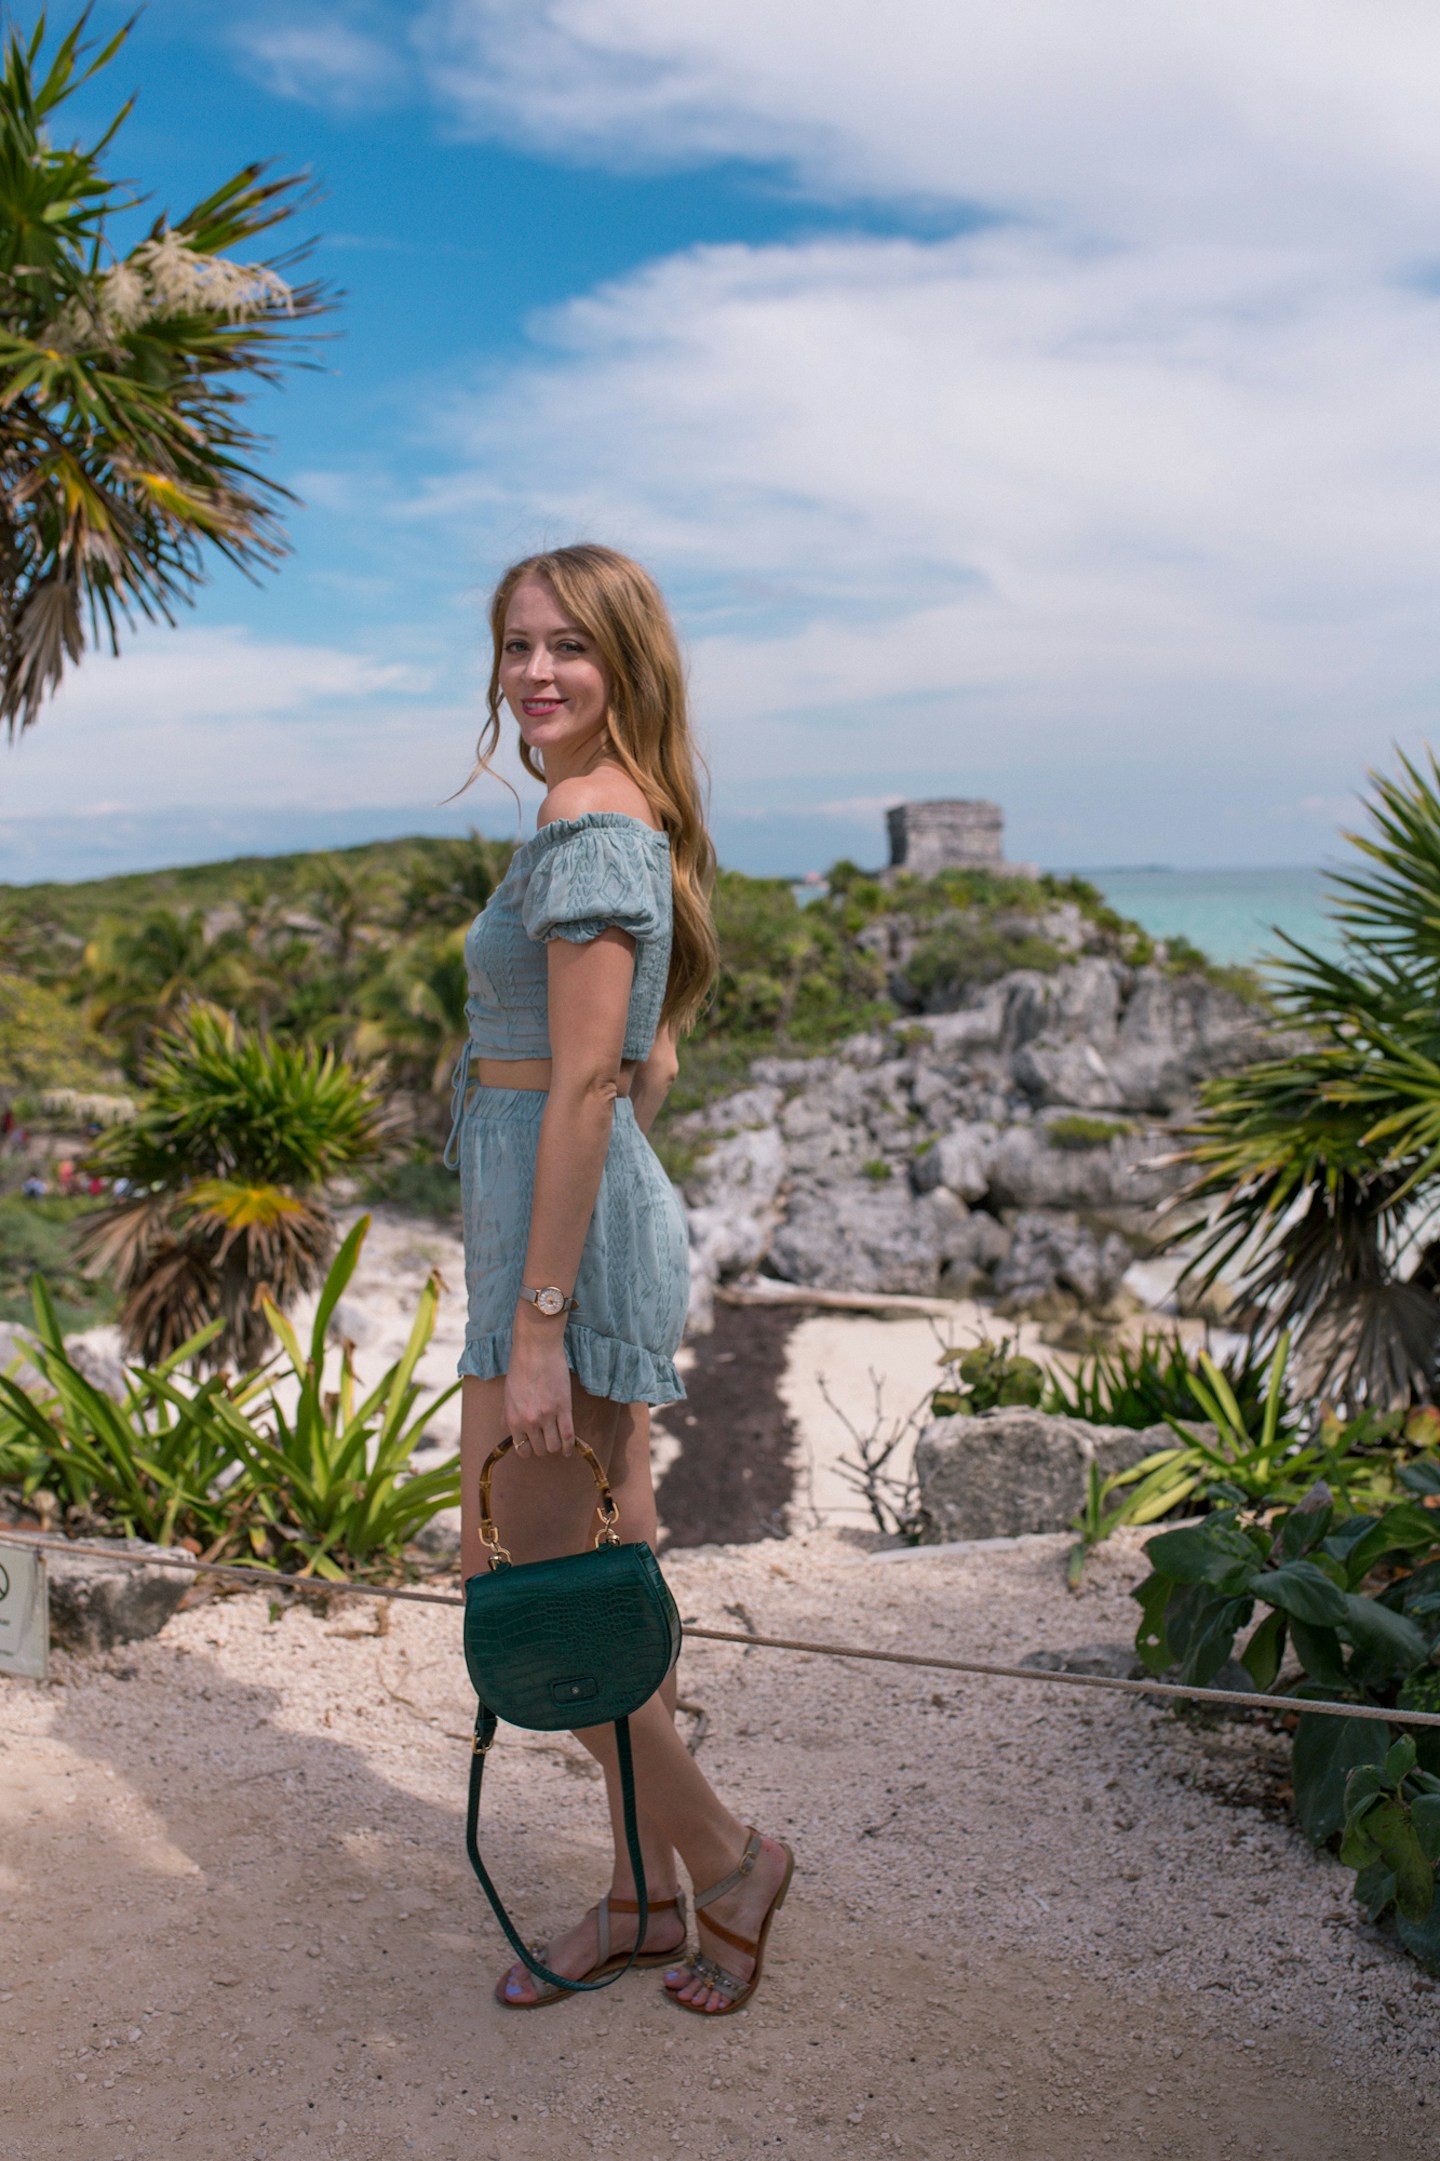 I'm sharing my top 10 Tips for Visiting Tulum Mexico. From stunning Mayan ruins on the cliffs to gorgeous beaches and snorkelling, my day trip from Playa del Carmen is perfect for the luxurious budget-conscious traveller.